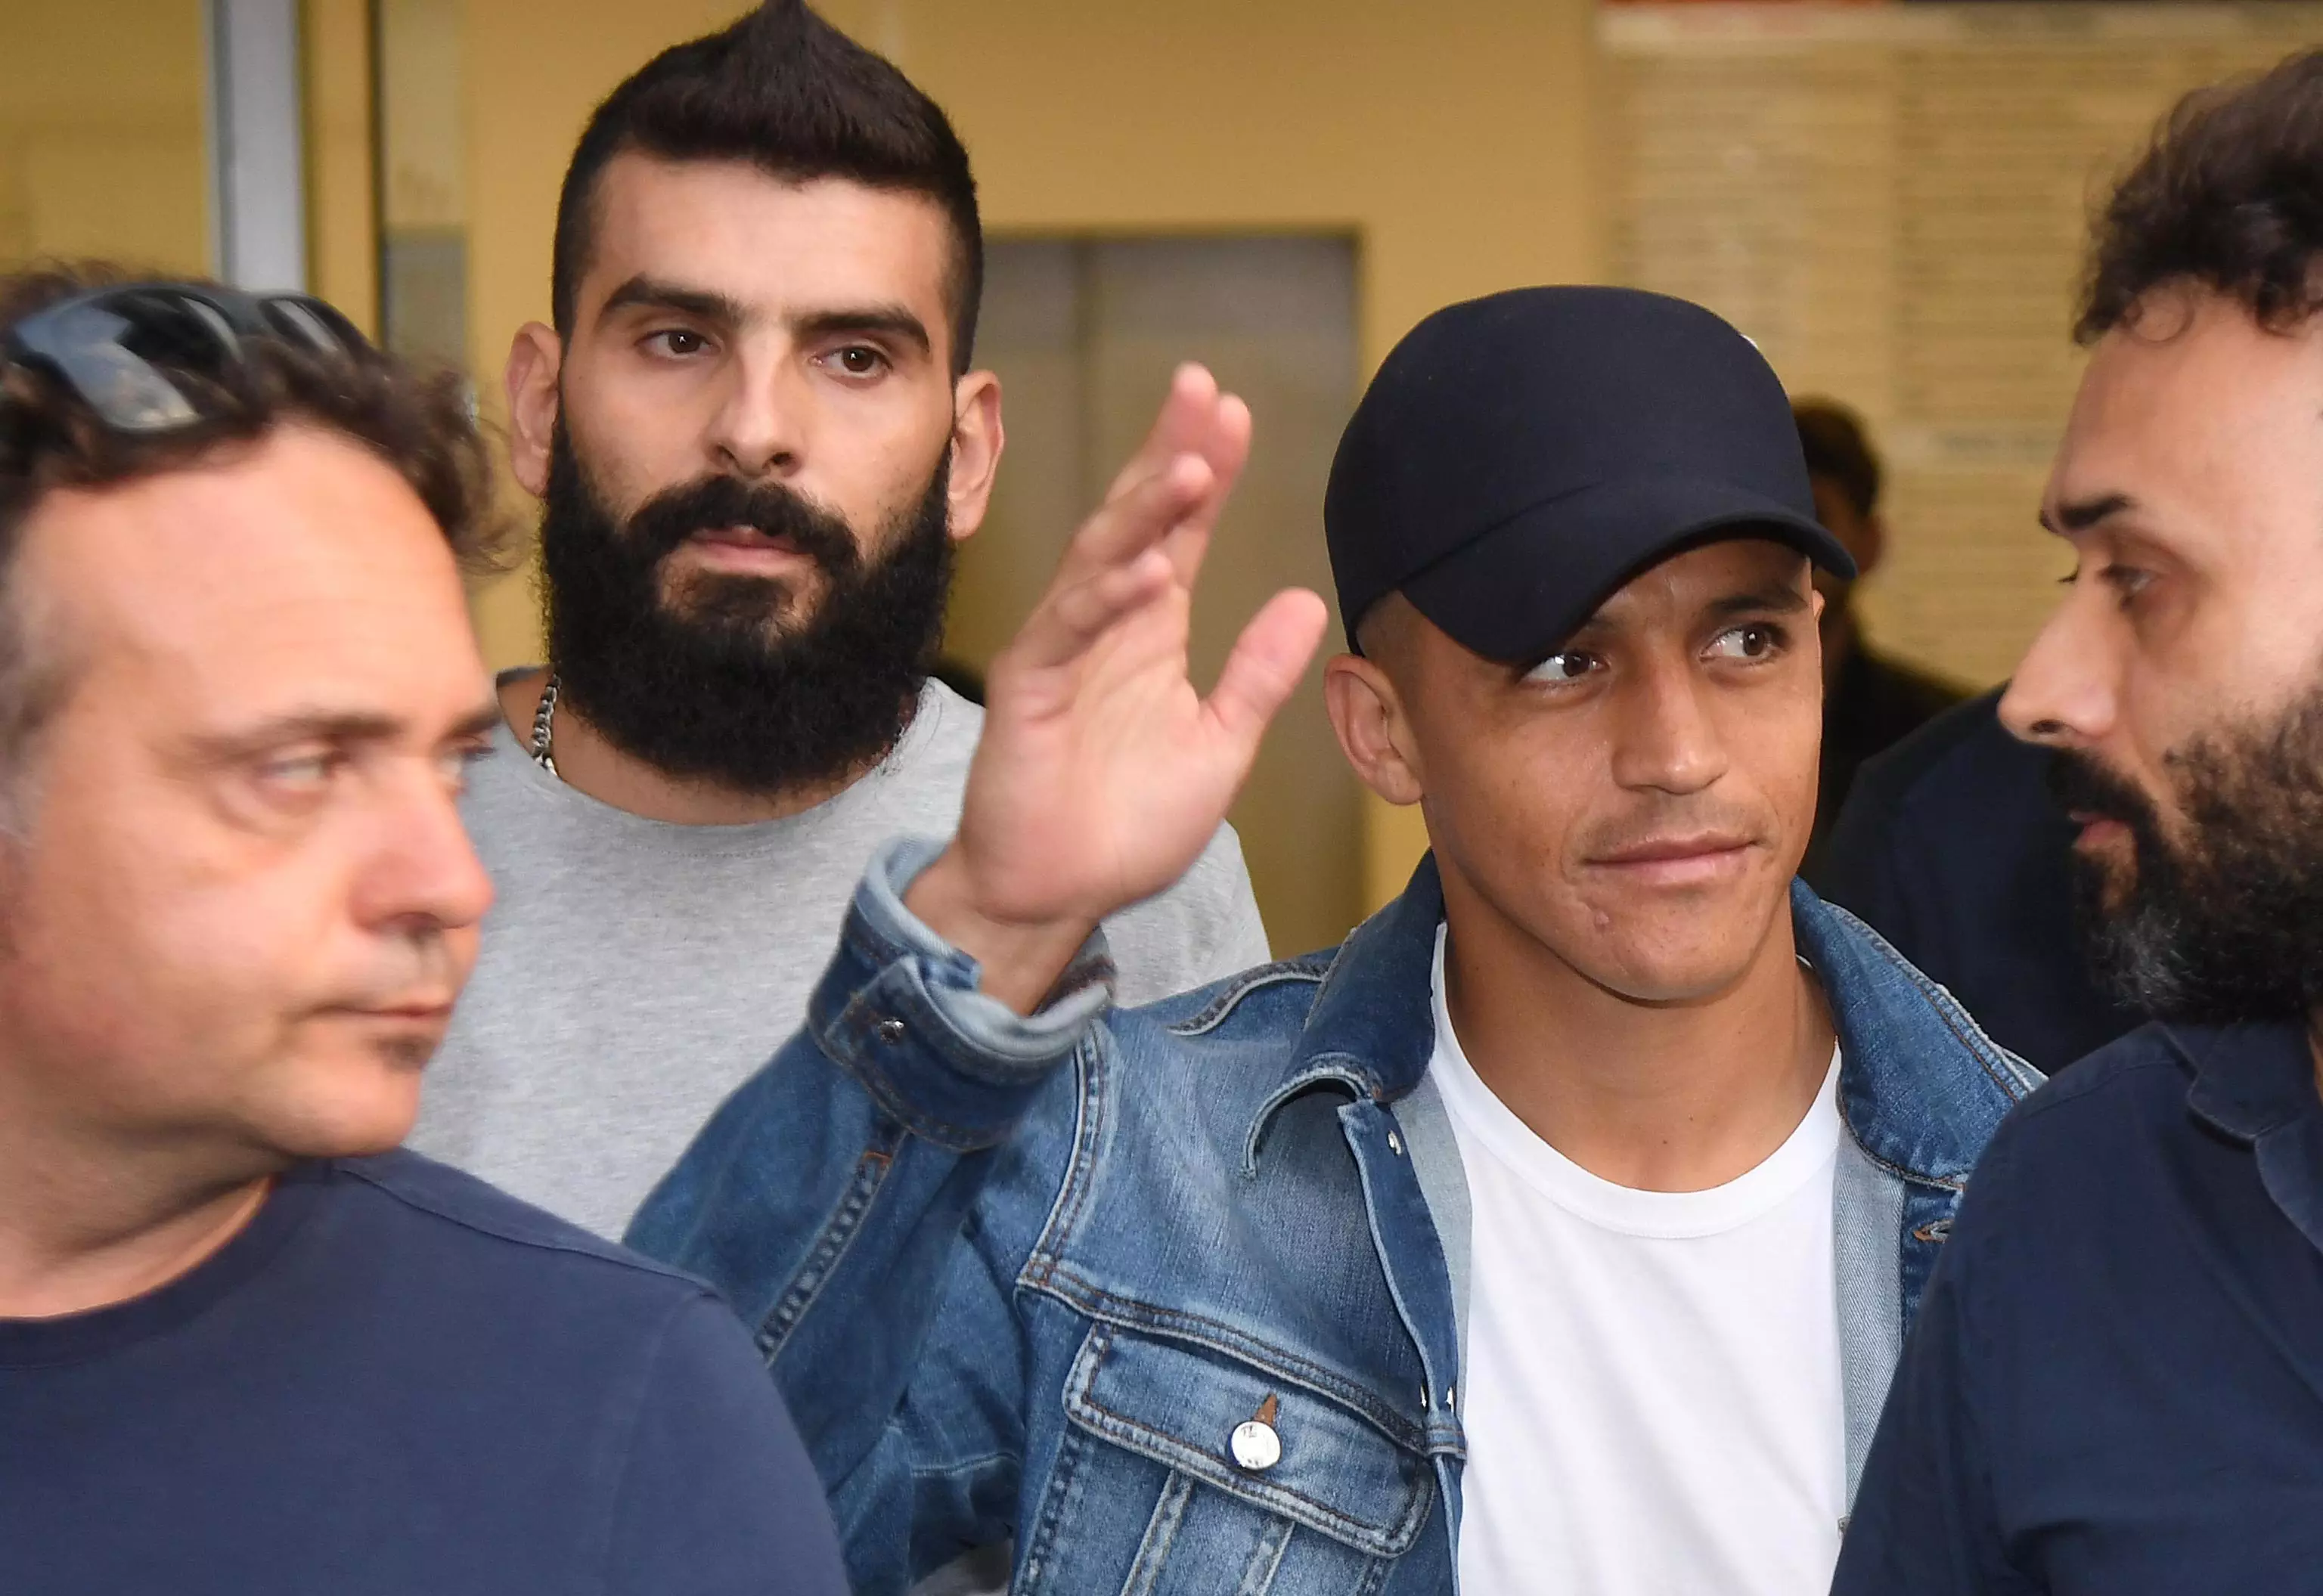 Alexis Sanchez flew to Italy this week for his Inter Milan medical ahead of a season-long loan deal